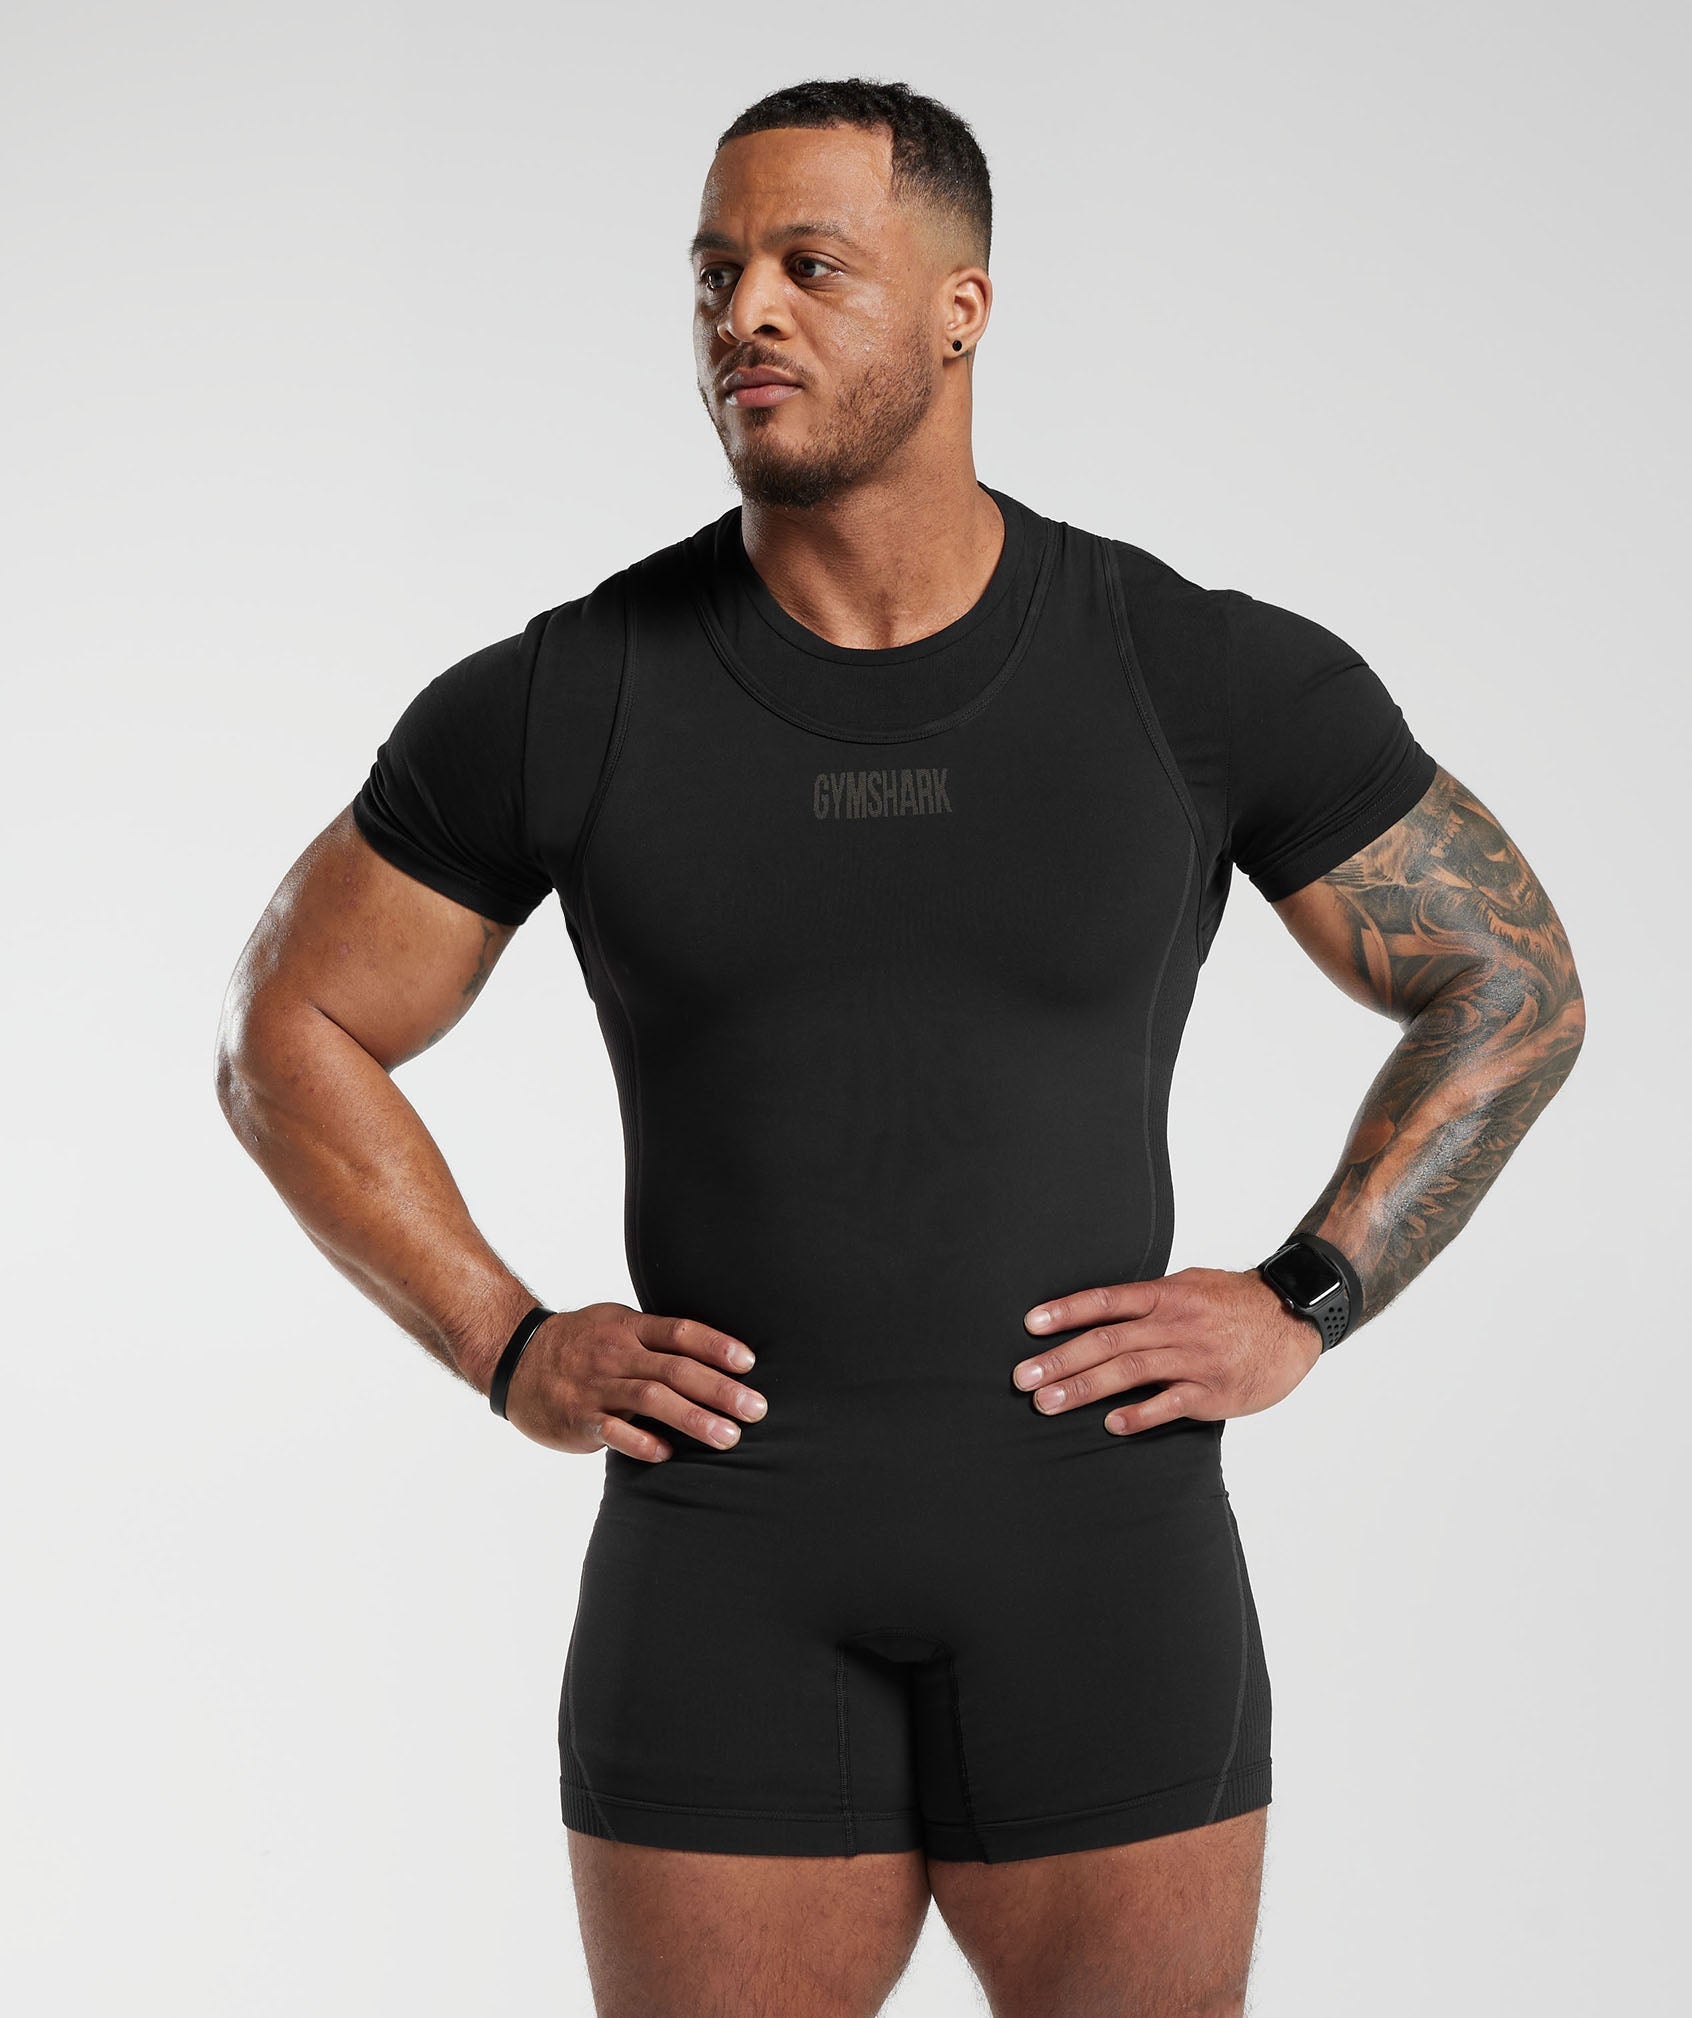 Power Seamless Shorts - Charcoal